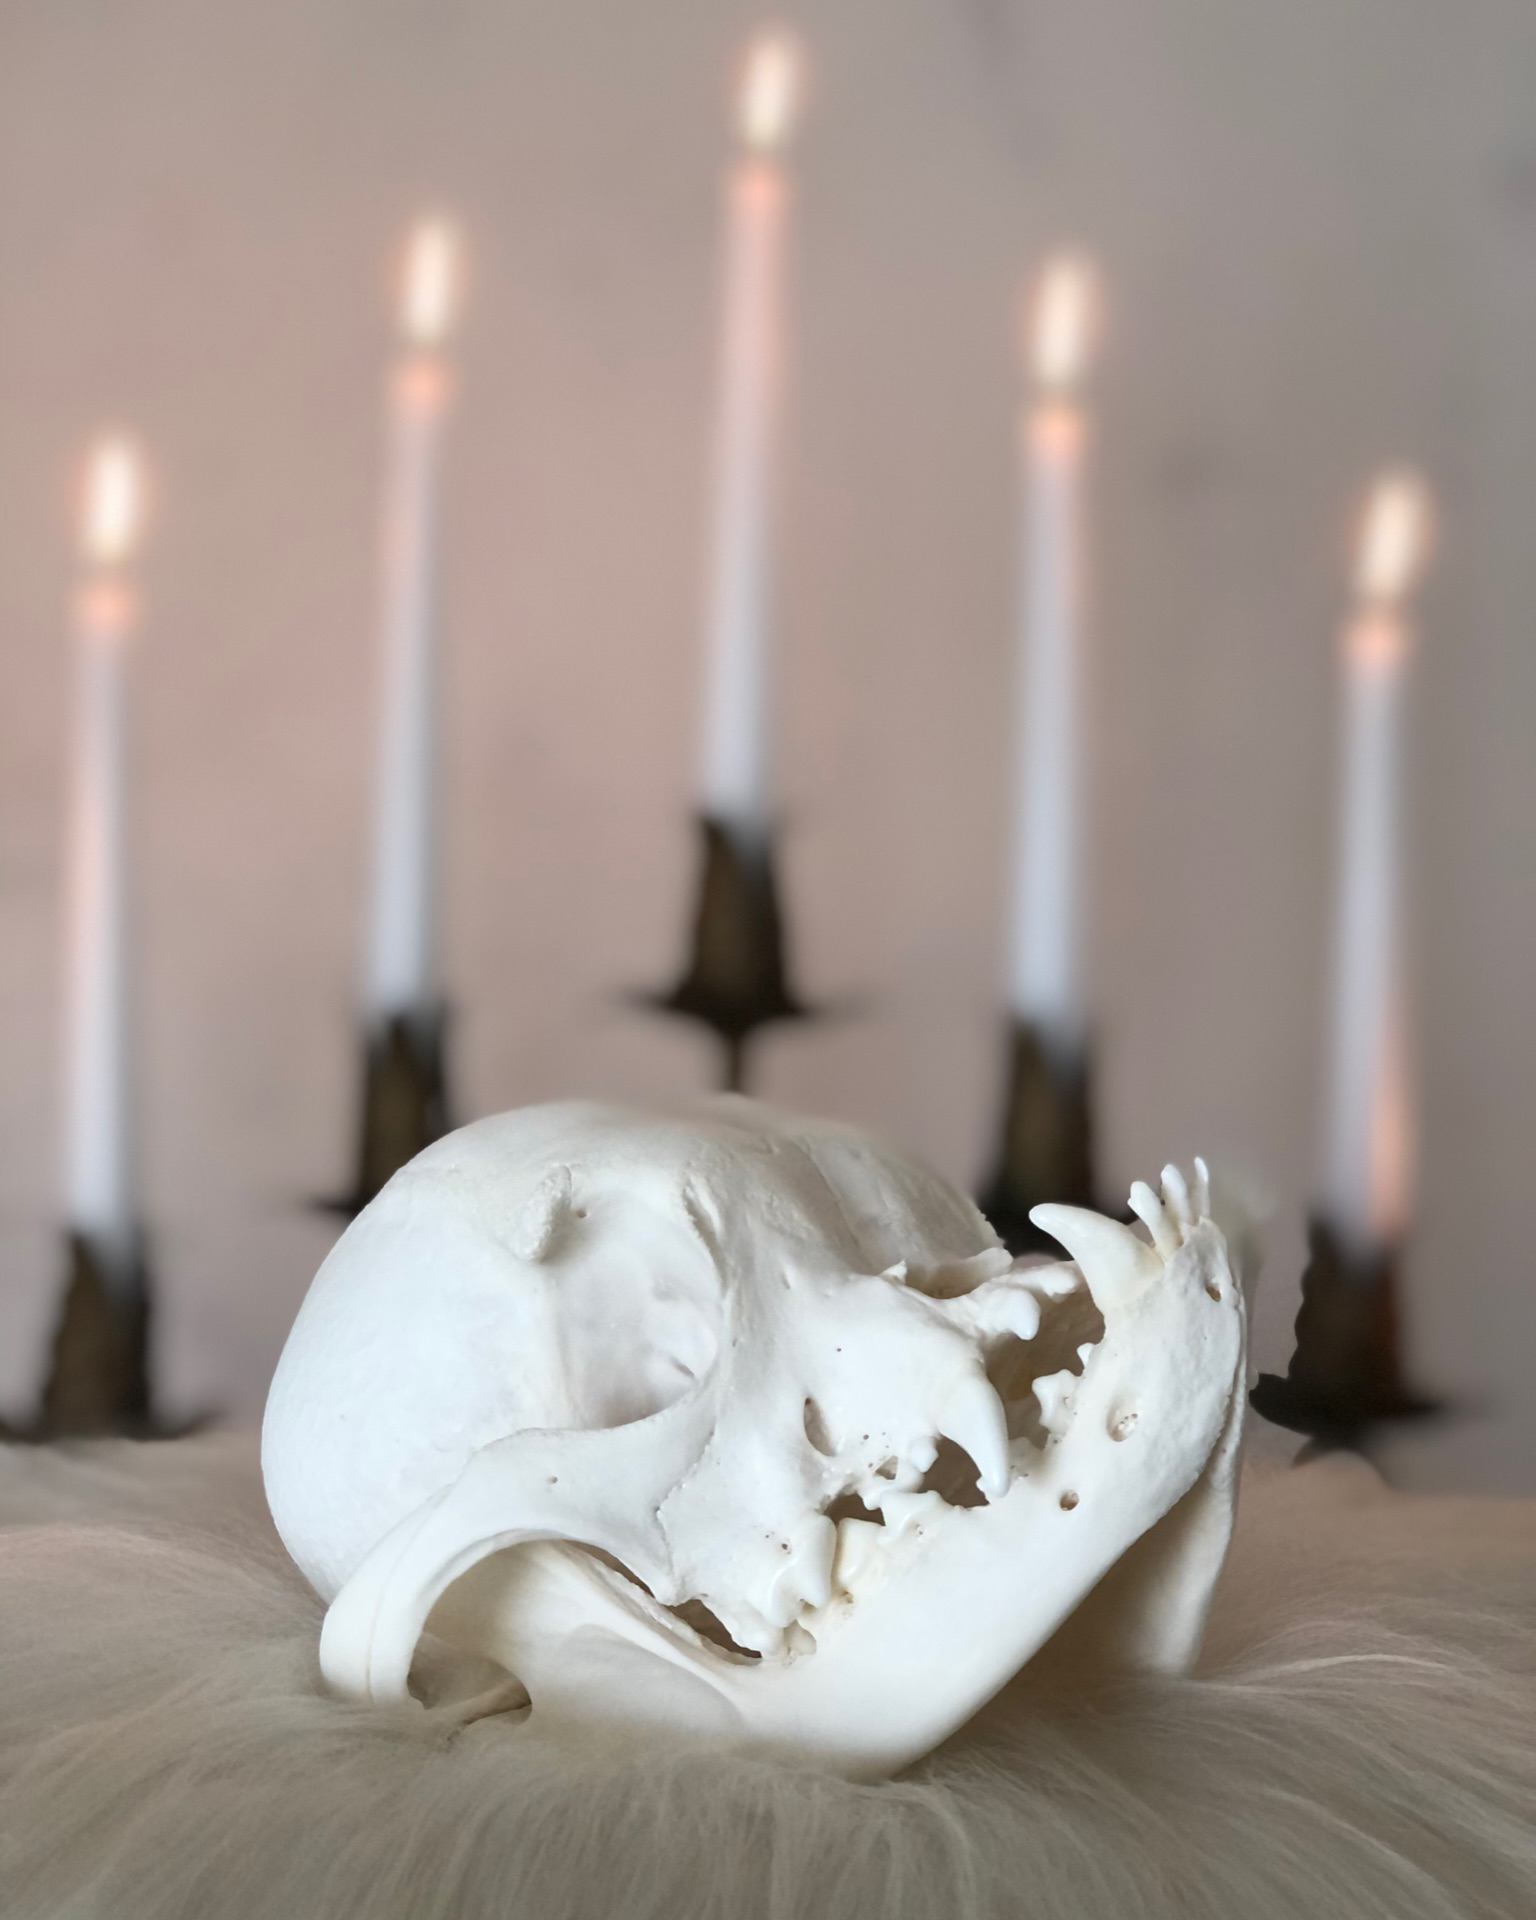 Dog skull with a pronounced underbite and lit candles in the background